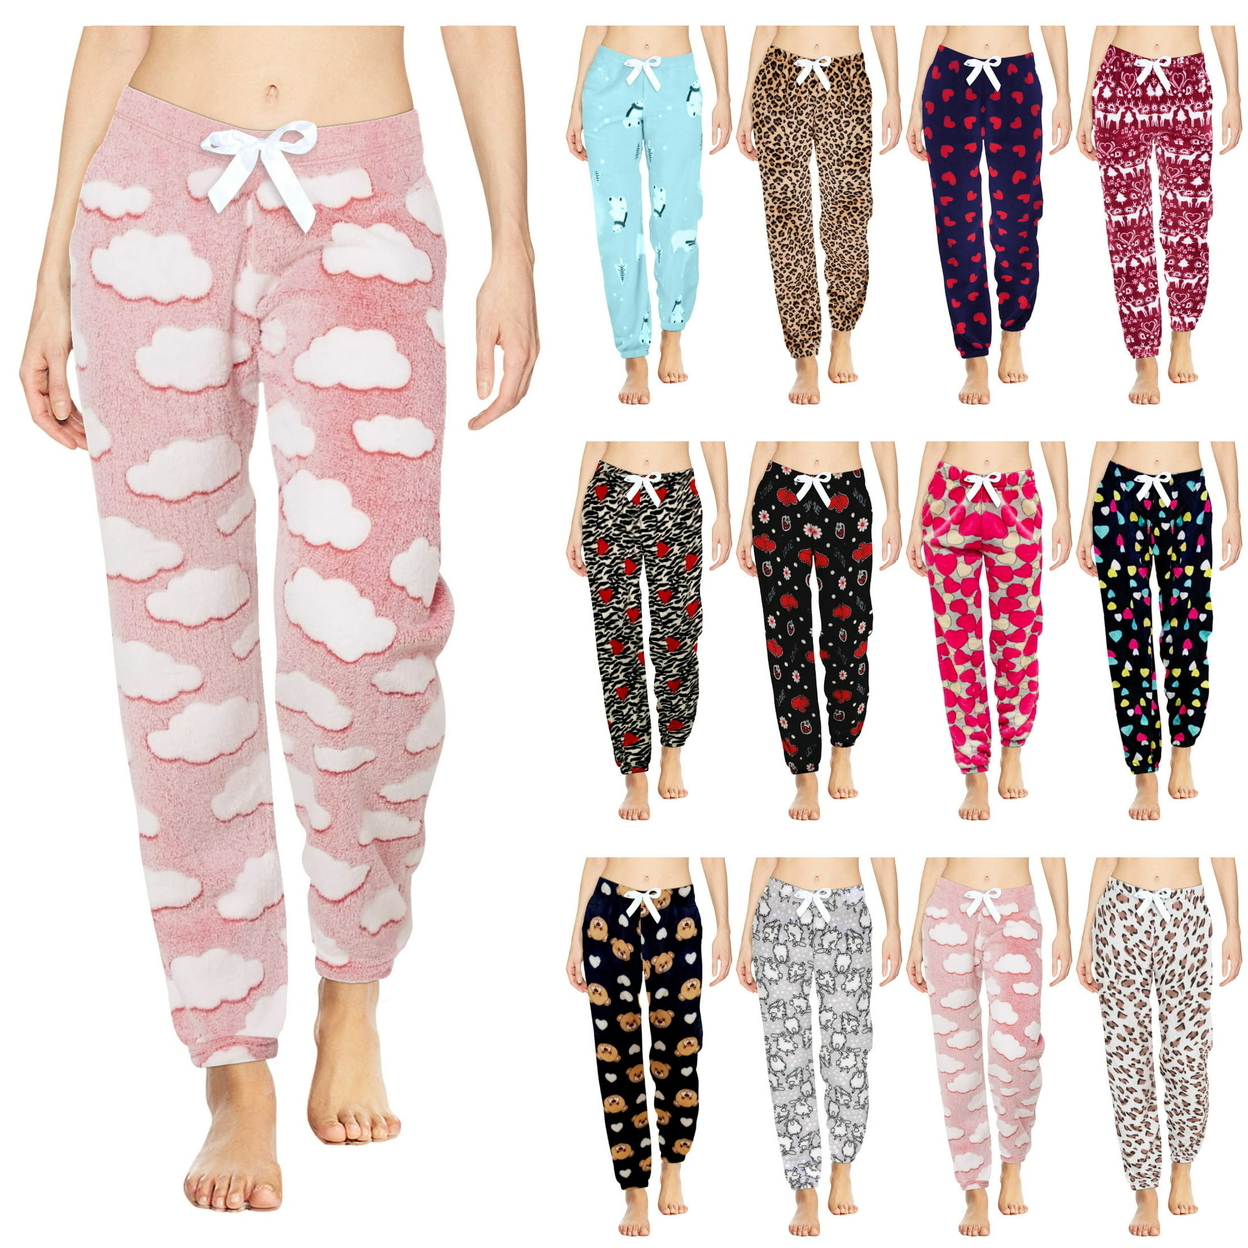 3-Pack: Women's Solid & Printed Ultra-Soft Comfy Stretch Micro-Fleece Pajama Lounge Pants - Large, Shapes